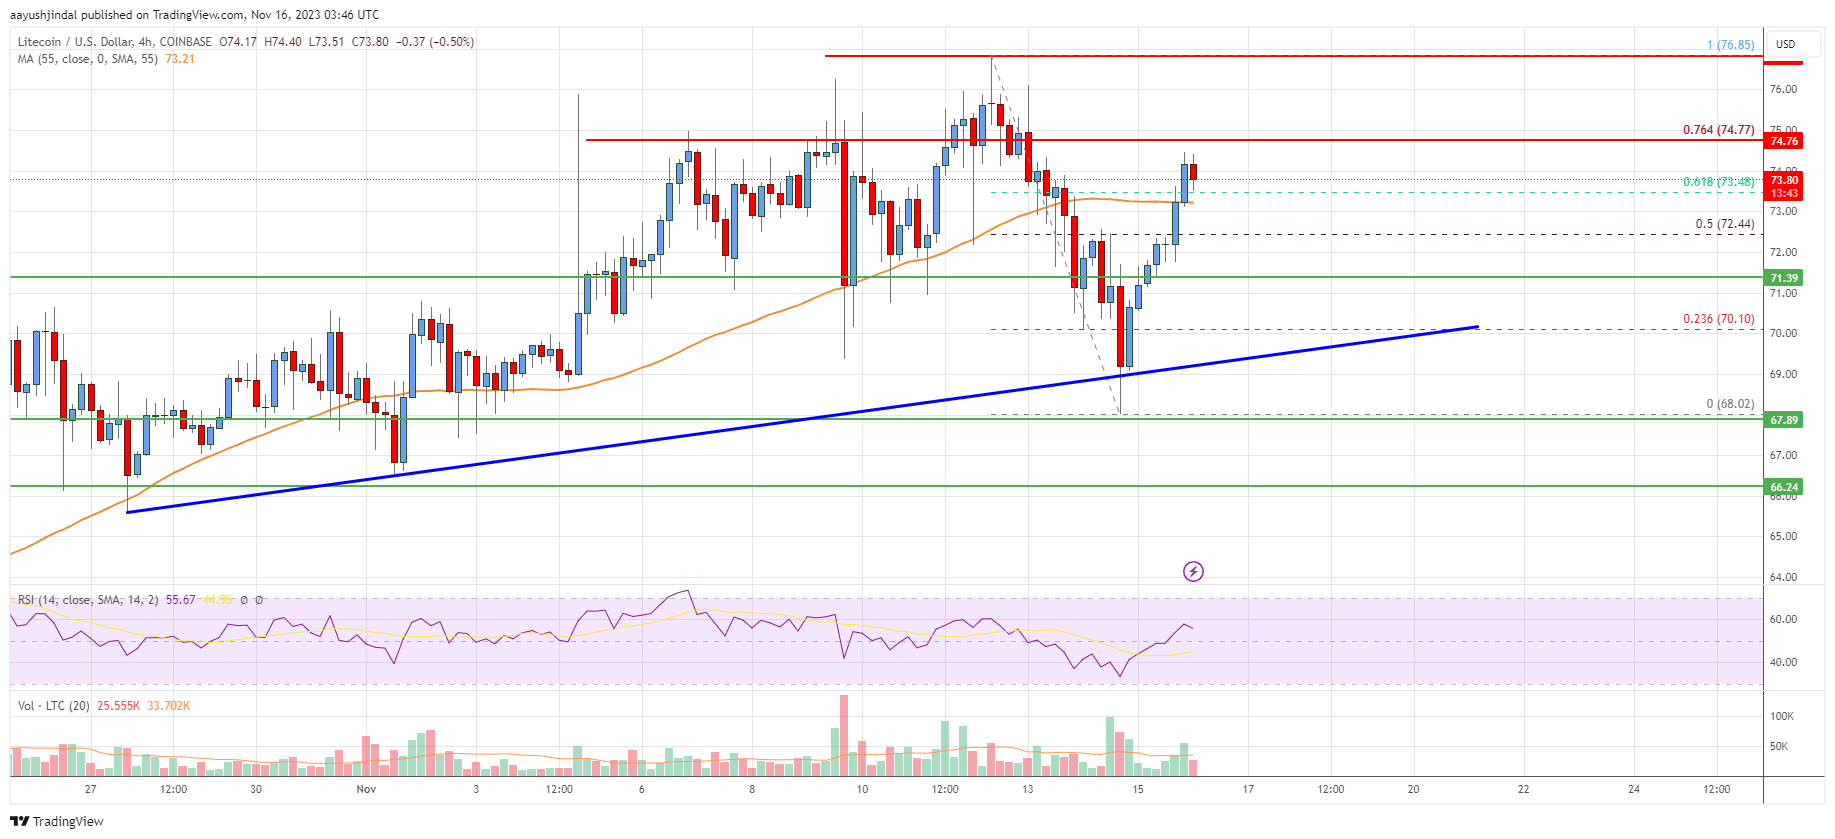 Litecoin (LTC) Price Analysis: Another 10% Increase Seems Likely